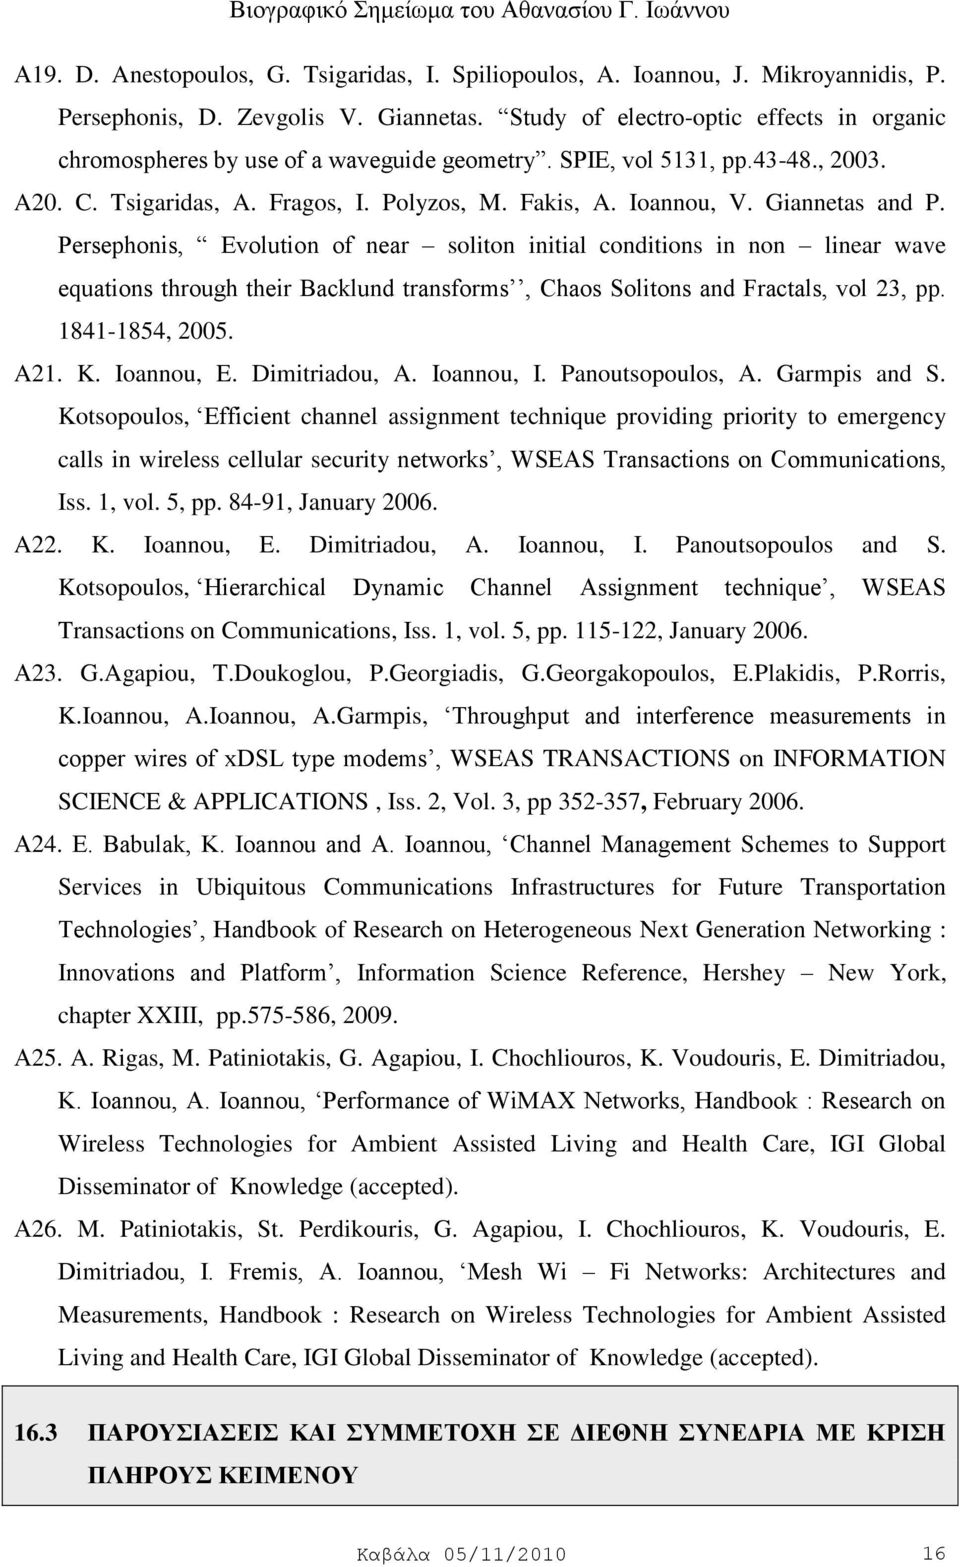 Giannetas and P. Persephonis, Evolution of near soliton initial conditions in non linear wave equations through their Backlund transforms, Chaos Solitons and Fractals, vol 23, pp. 1841-1854, 2005.